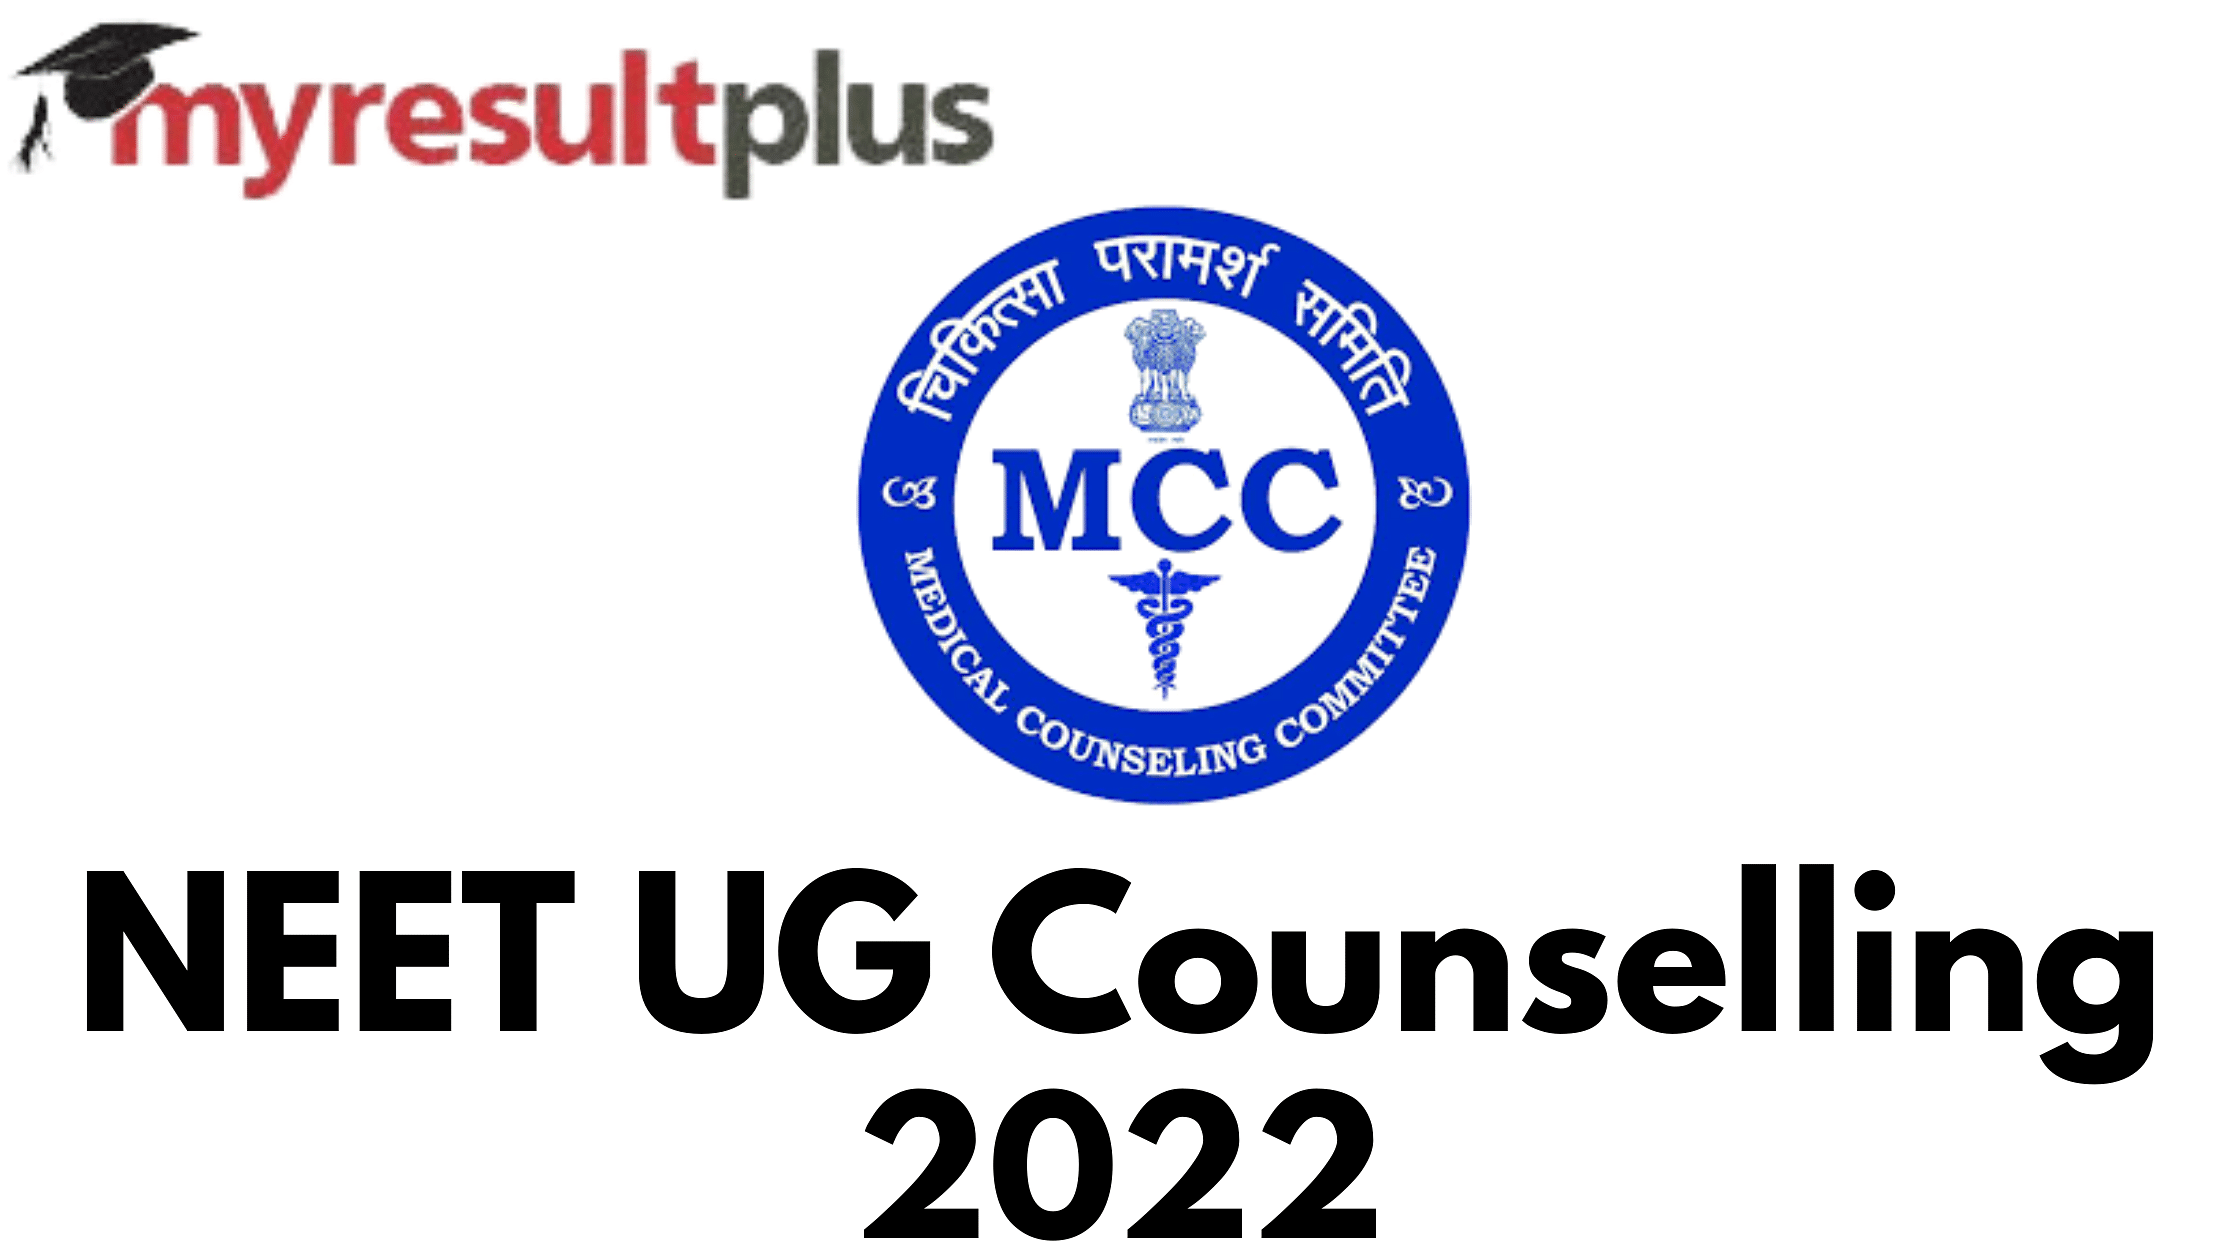 NEET UG Counselling 2022 Expected To Begin Soon, Check List of Documents Required Here